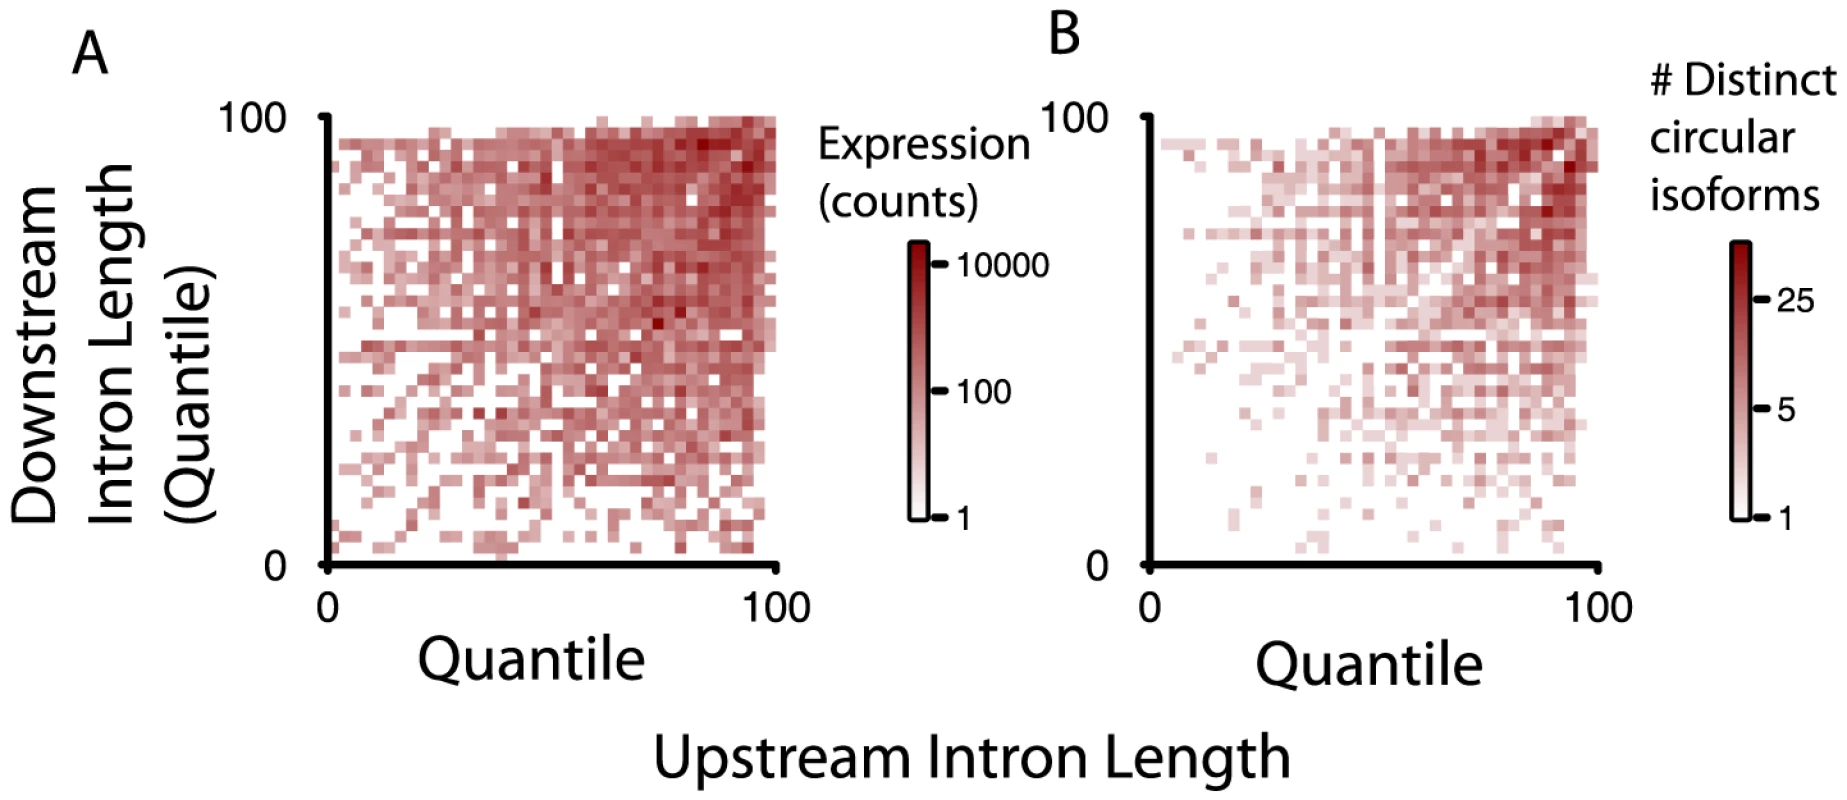 Intron length is enriched around exons defining circular RNA, but alone not explanatory of circular RNA expression.